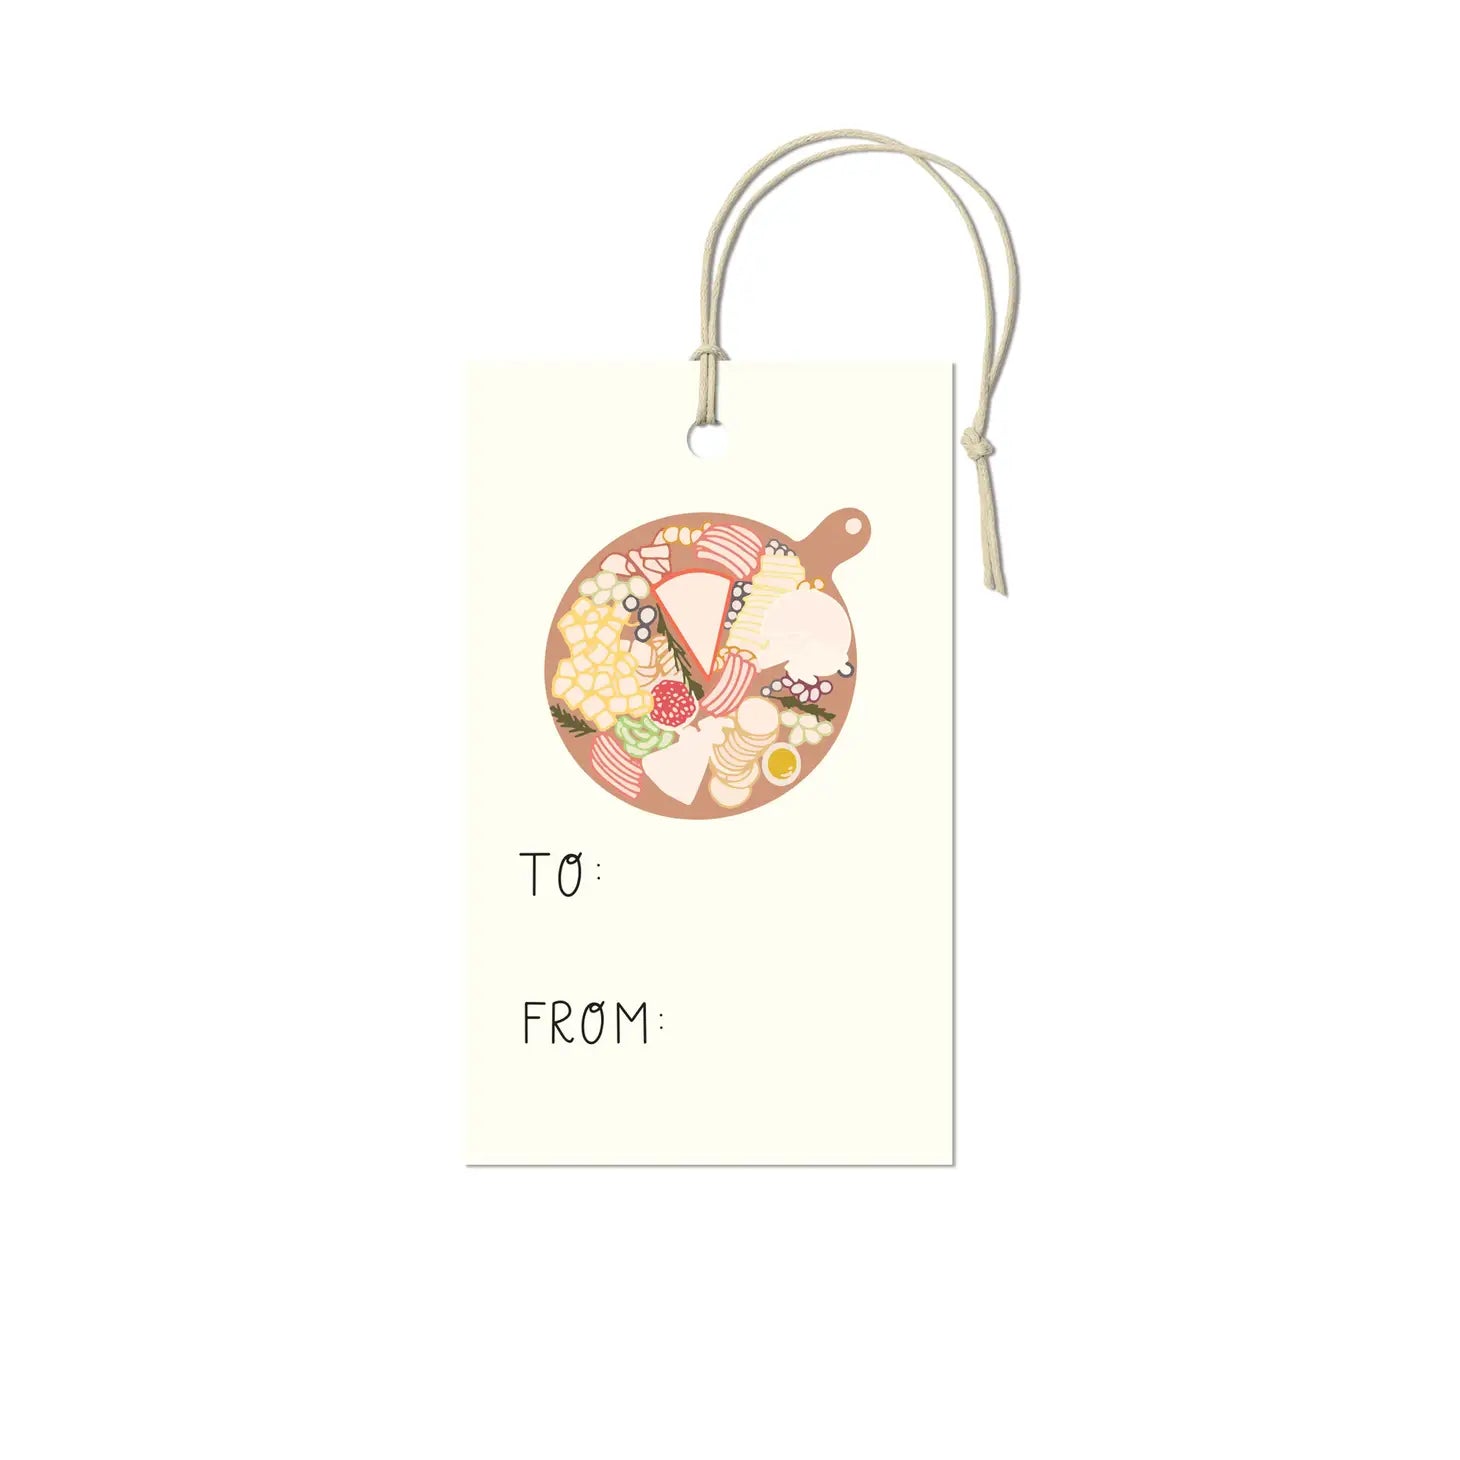 White gift tag with a charcuterie board illustration on it. Below that it says "To:" and "From:"